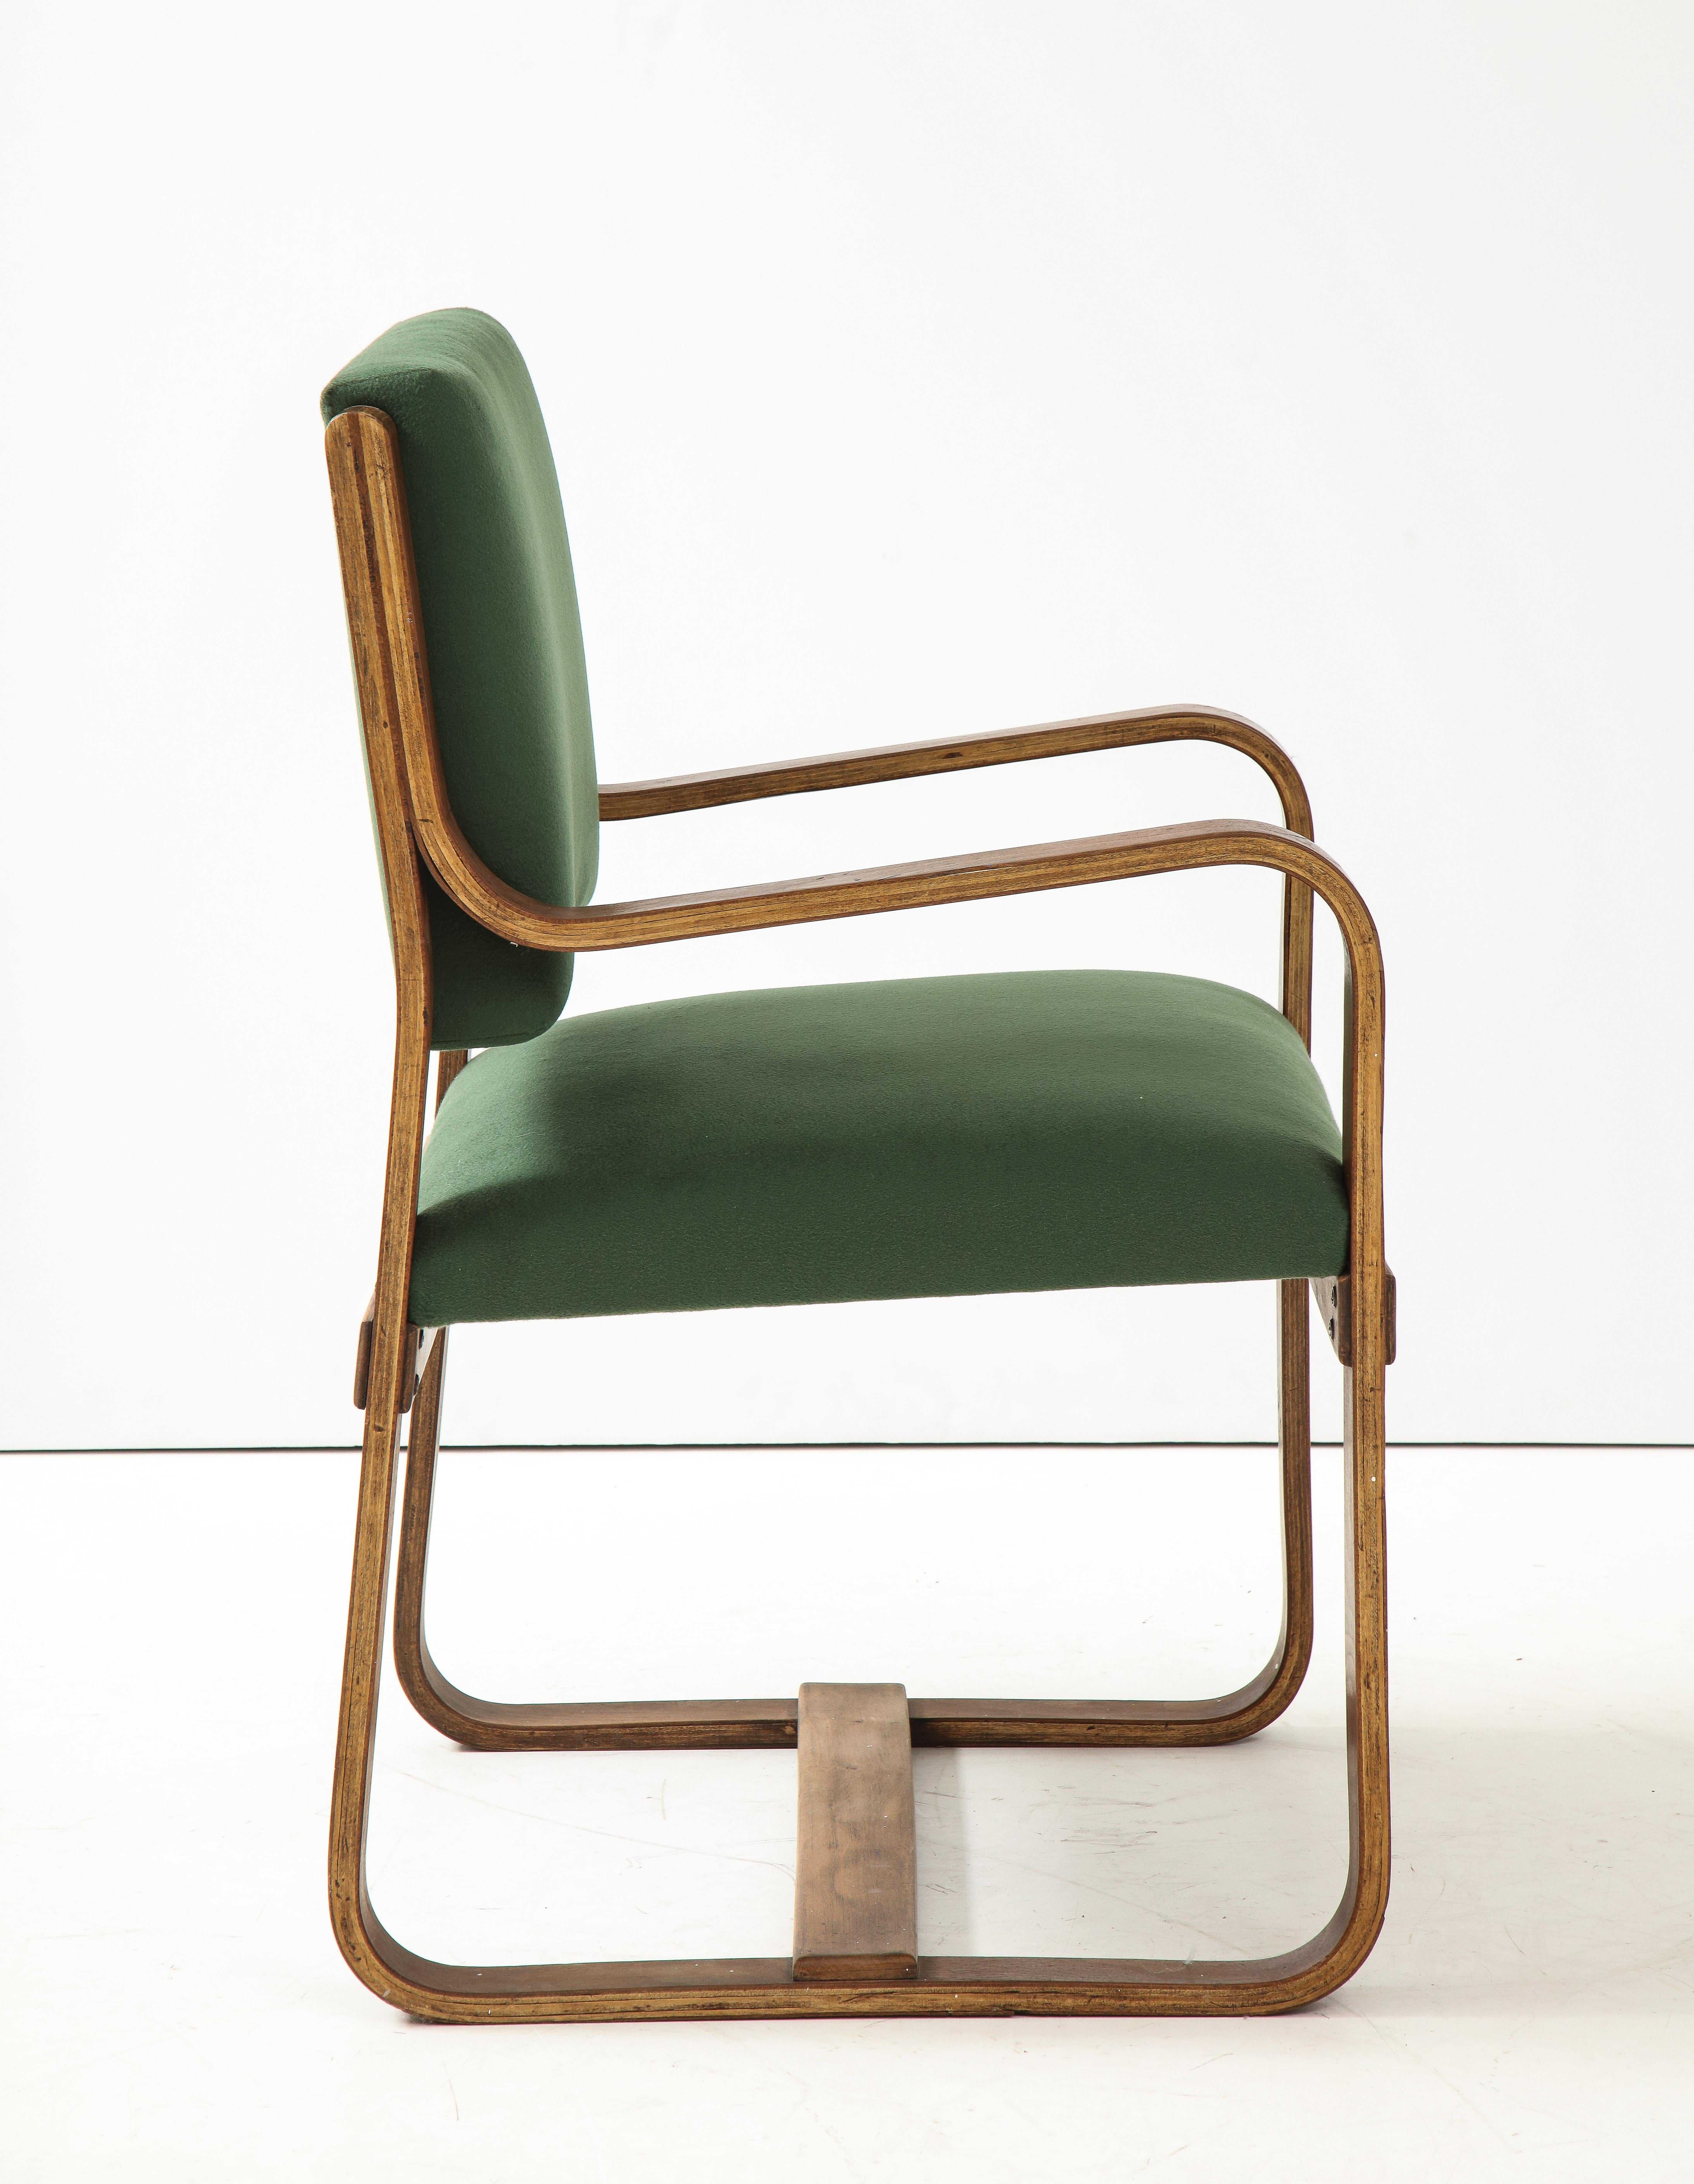 Curved Laminated Wood Armchair in Green Cashmere by Giuseppe Pagano, c. 1940s In Good Condition For Sale In New York City, NY